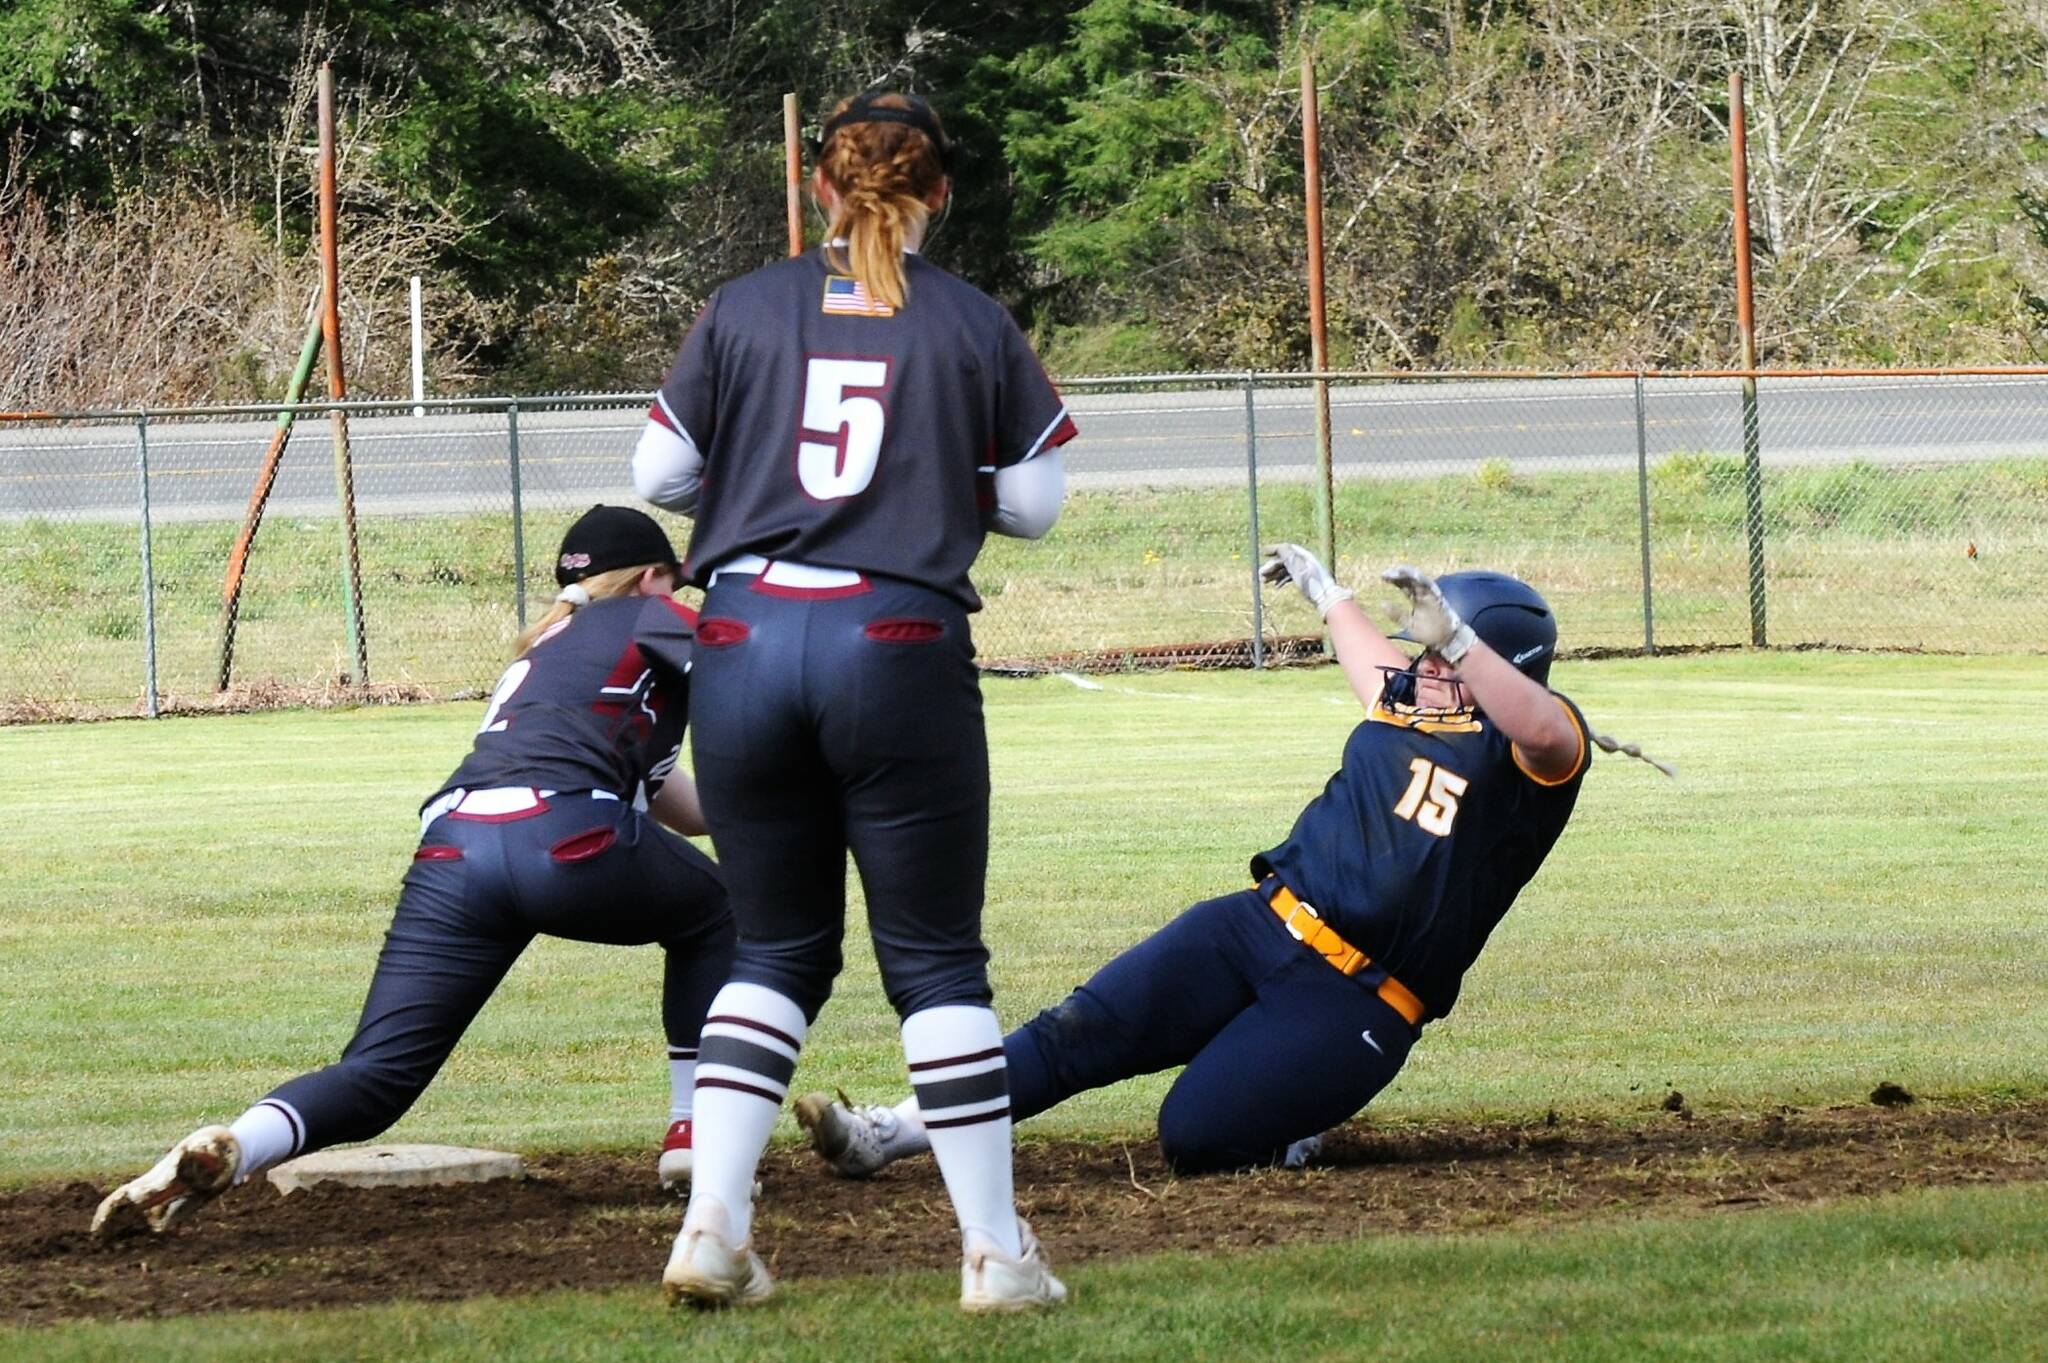 Nicole Winger was safe at second on this close call.